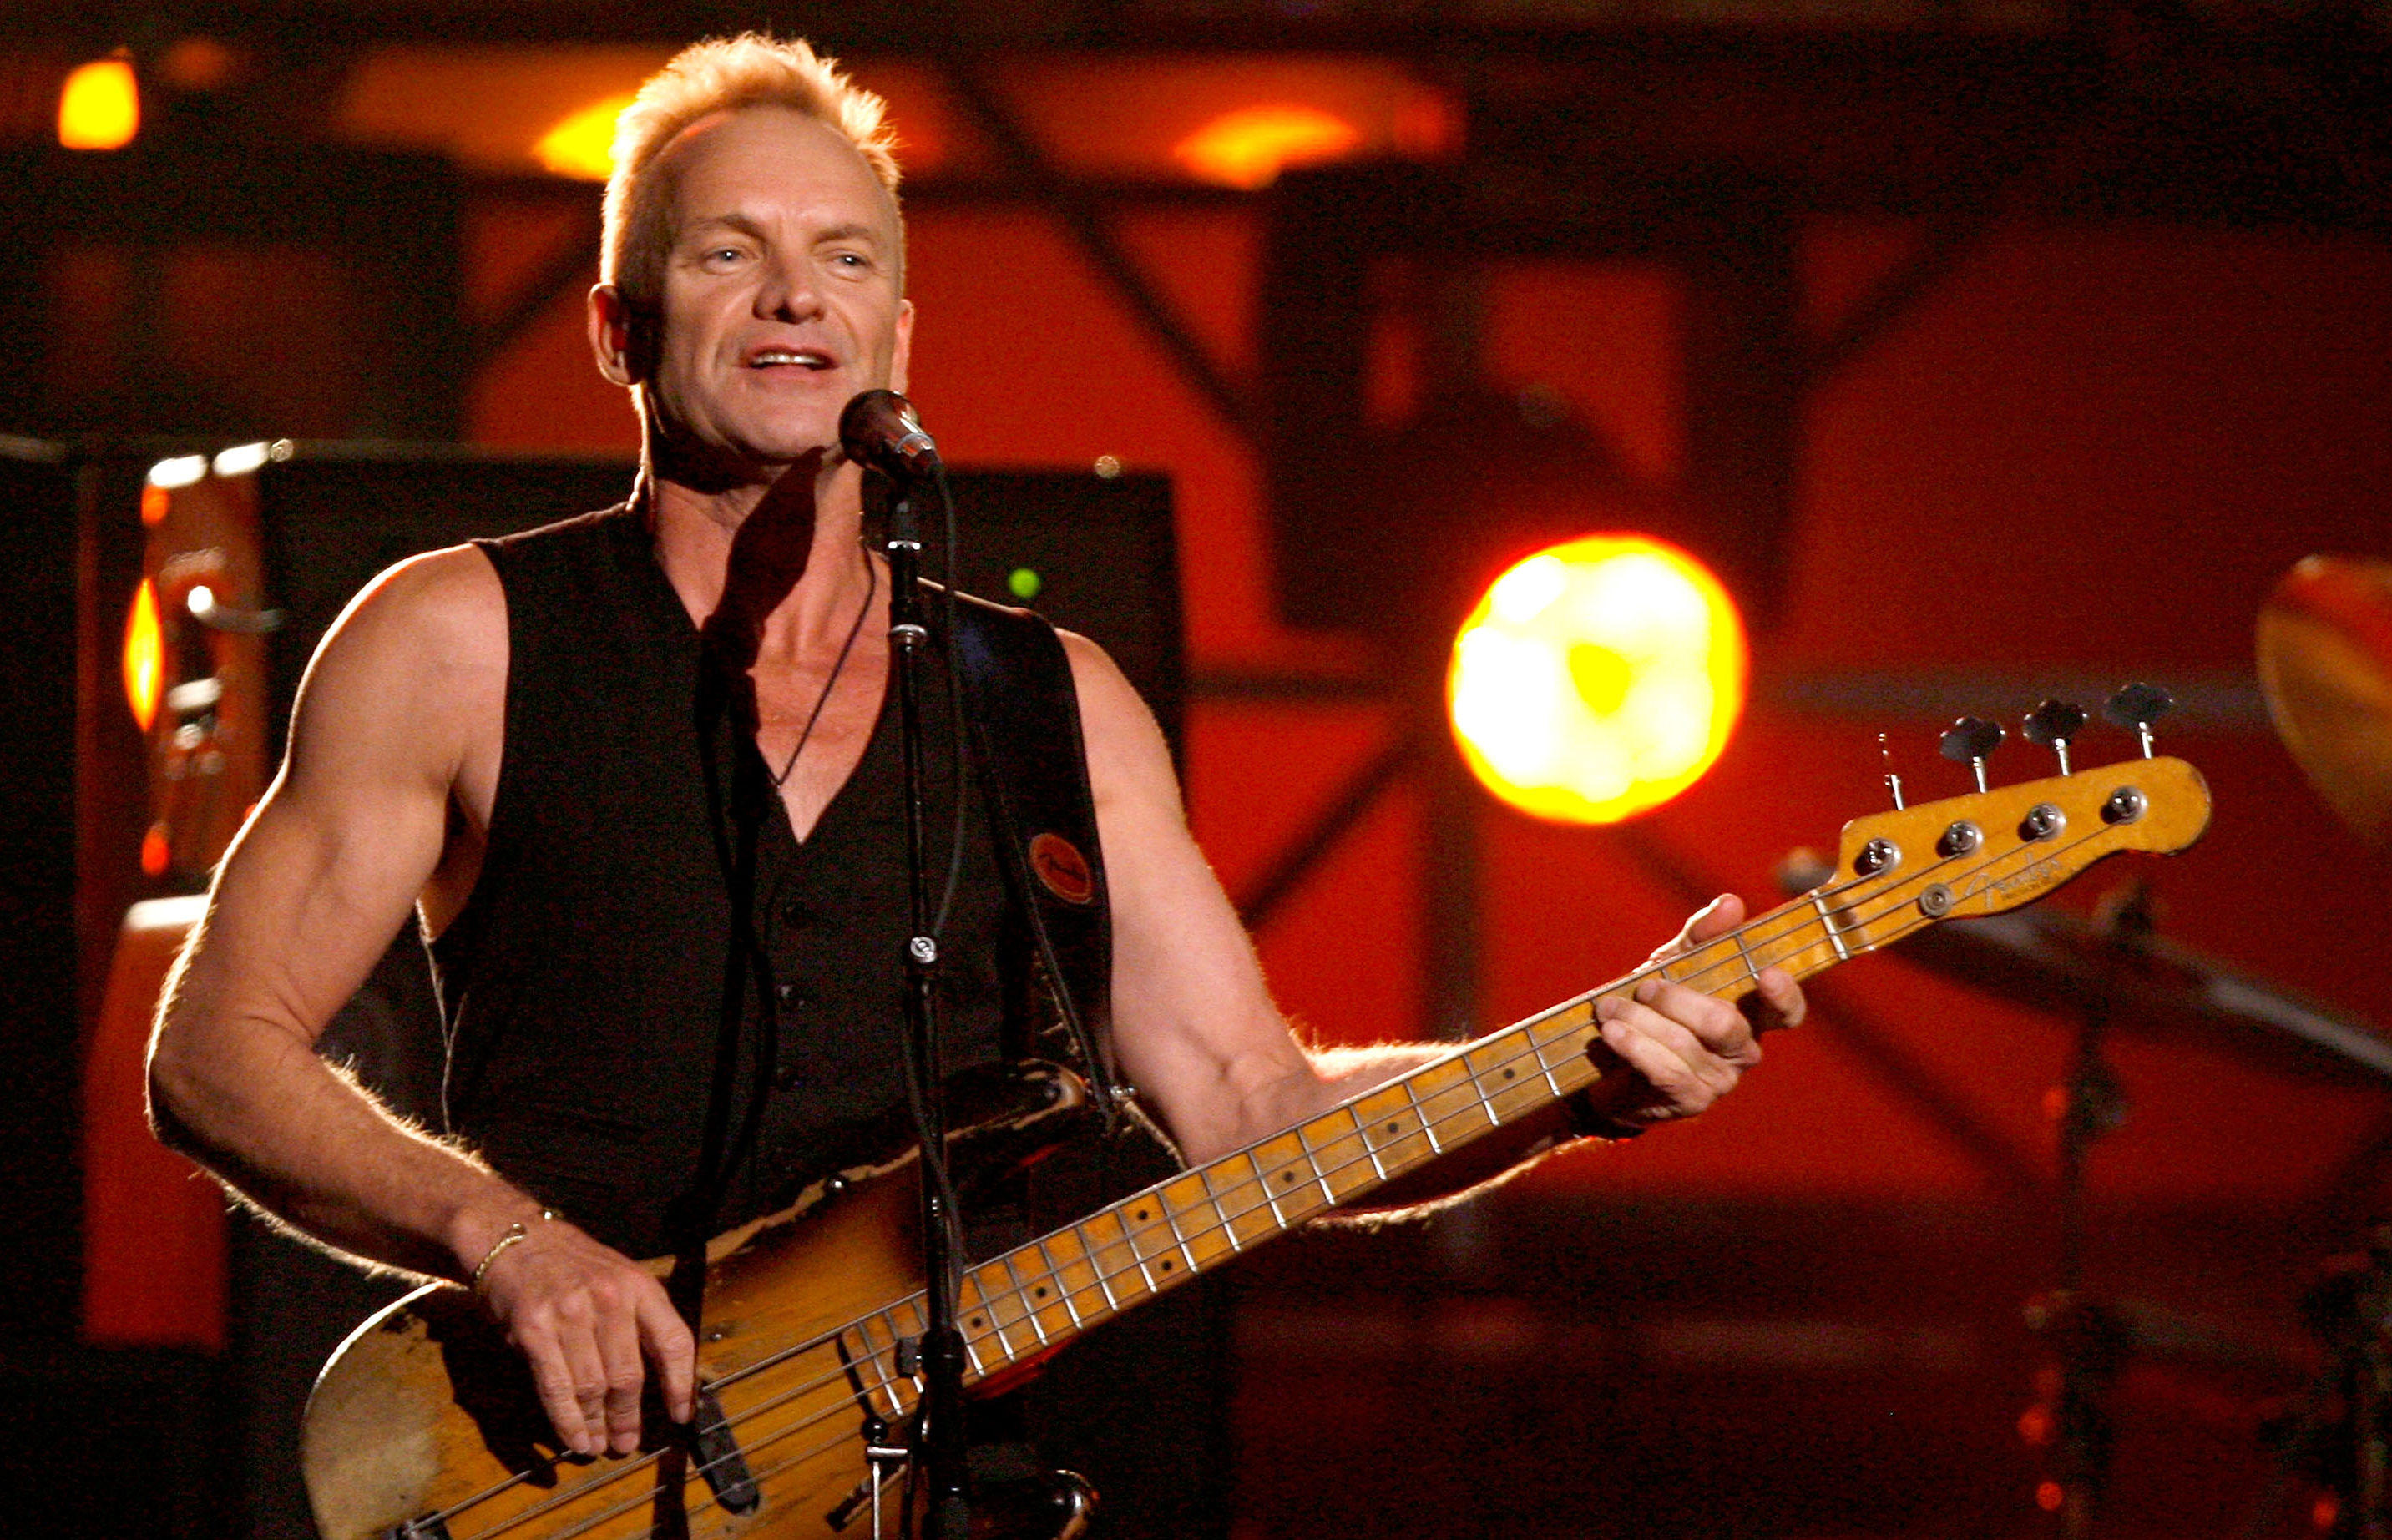 LOS ANGELES, CA - FEBRUARY 11: Musician Sting performs "Roxanne" onstage with the band The Police opening the 49th Annual Grammy Awards at the Staples Center on February 11, 2007 in Los Angeles, California. (Photo by Kevin Winter/Getty Images)